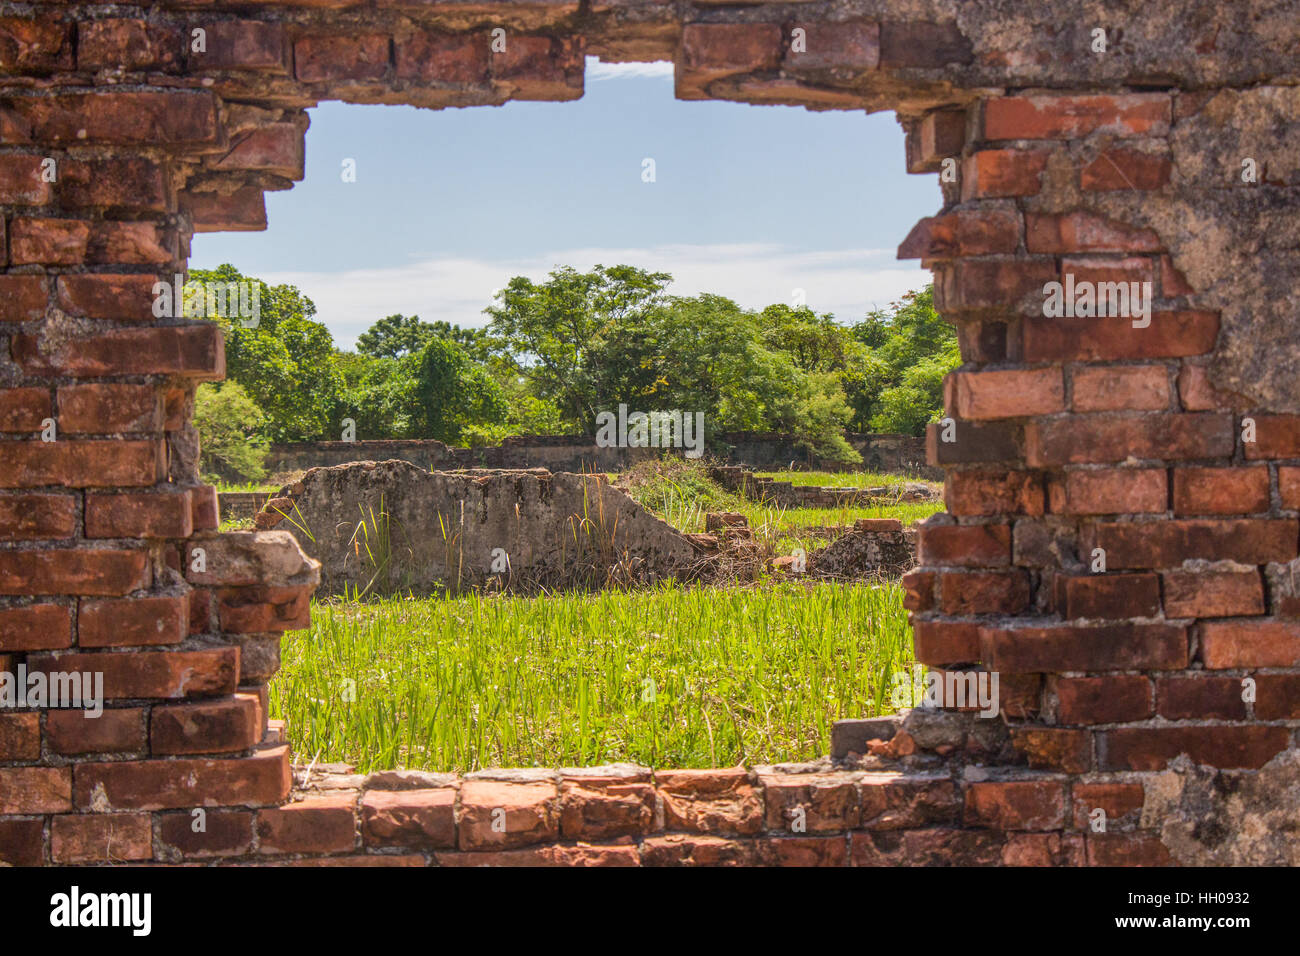 Looking out through the weathered decaying window at overgrown ruins. Imperial Citadel, Hue, Vietnam Stock Photo